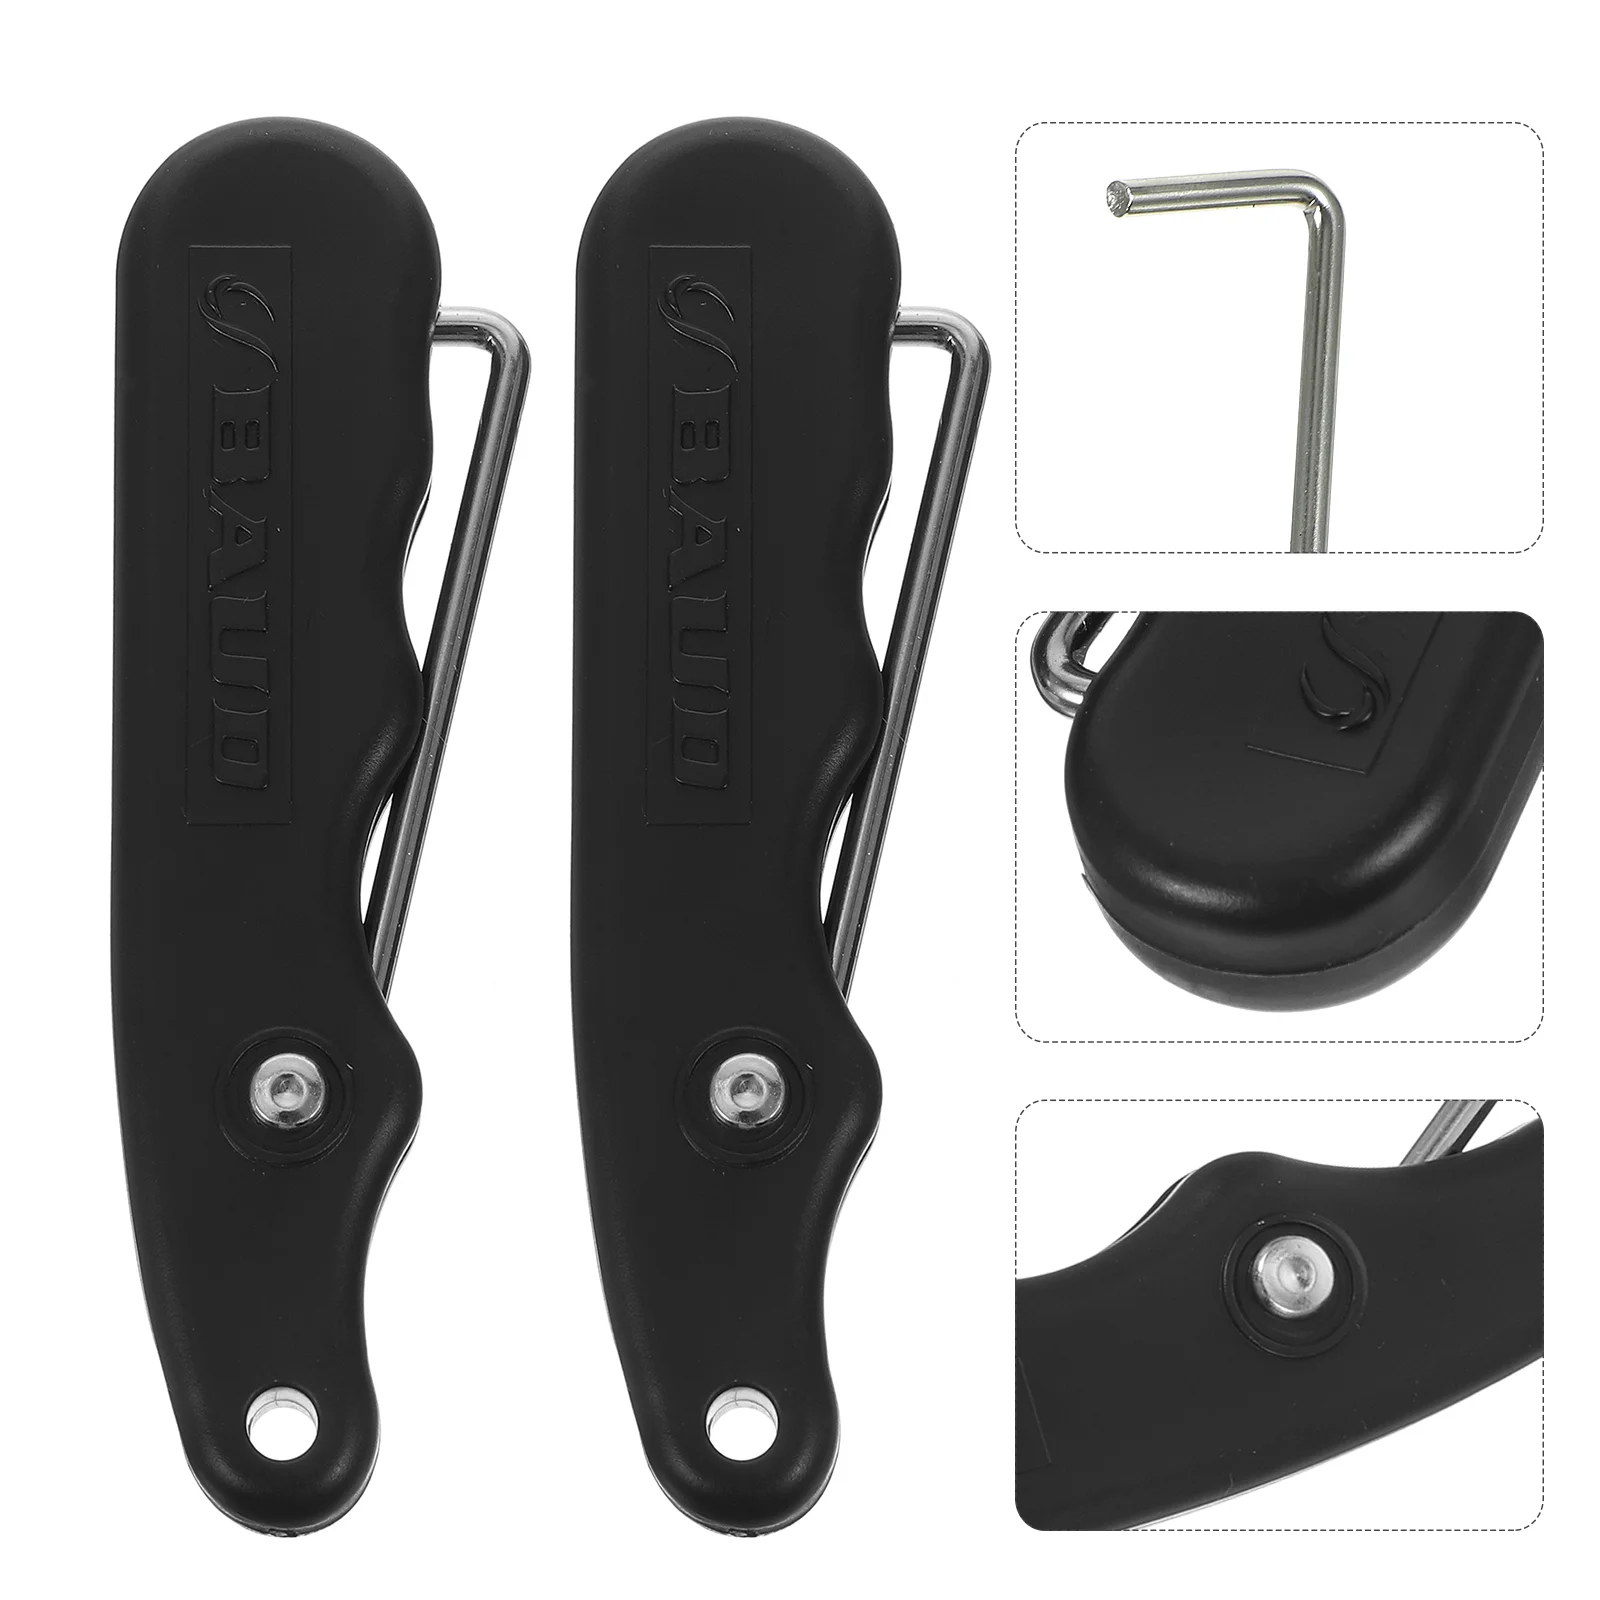 

Stainless Professional Skate Shoes Lace Tightener Portable Skating Shoes Tightener Practical Skating Supplies Accessory